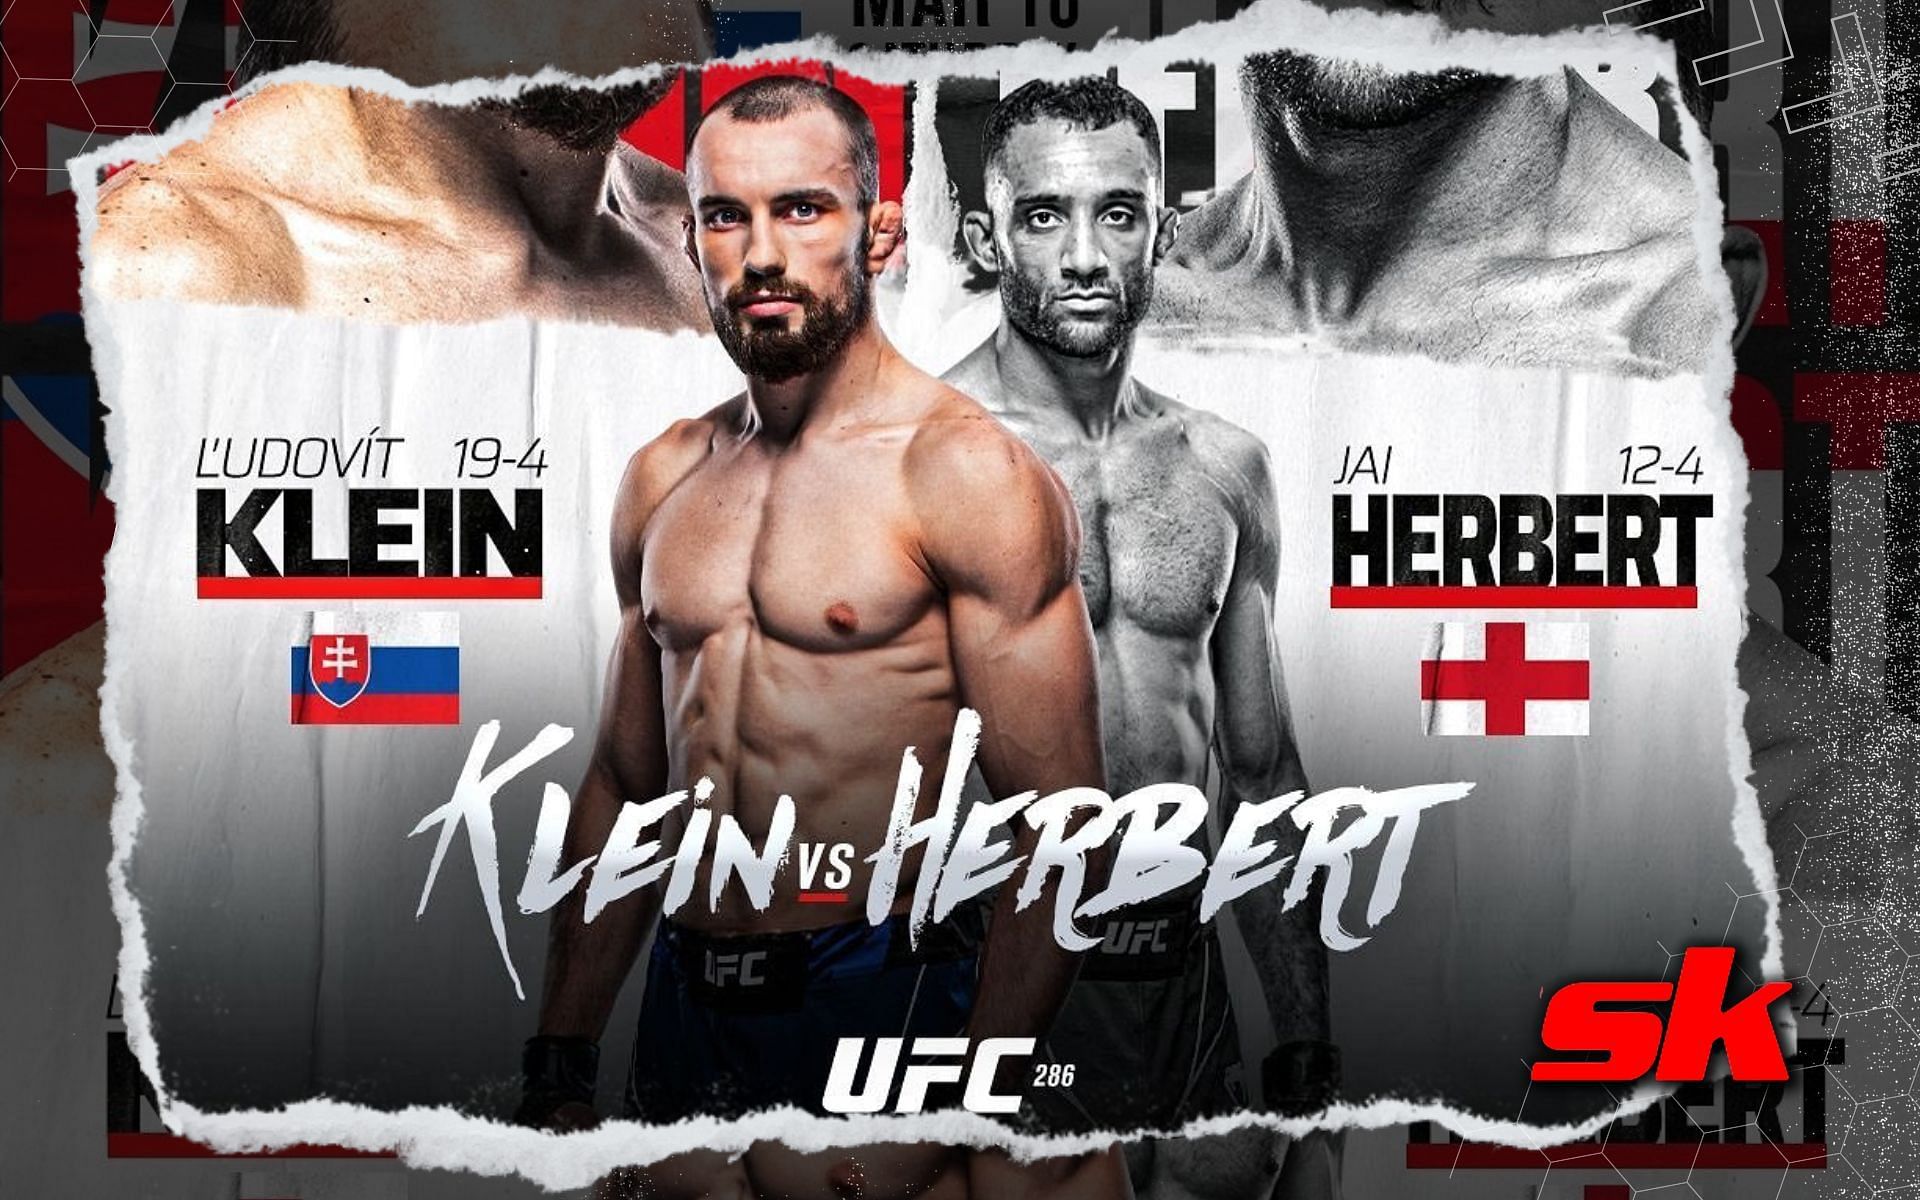 Jai Herbert and Ľudov&iacute;t Klein are set to face off at UFC 286 on March 18. [Image credis: @lajosko.klein on Instagram]